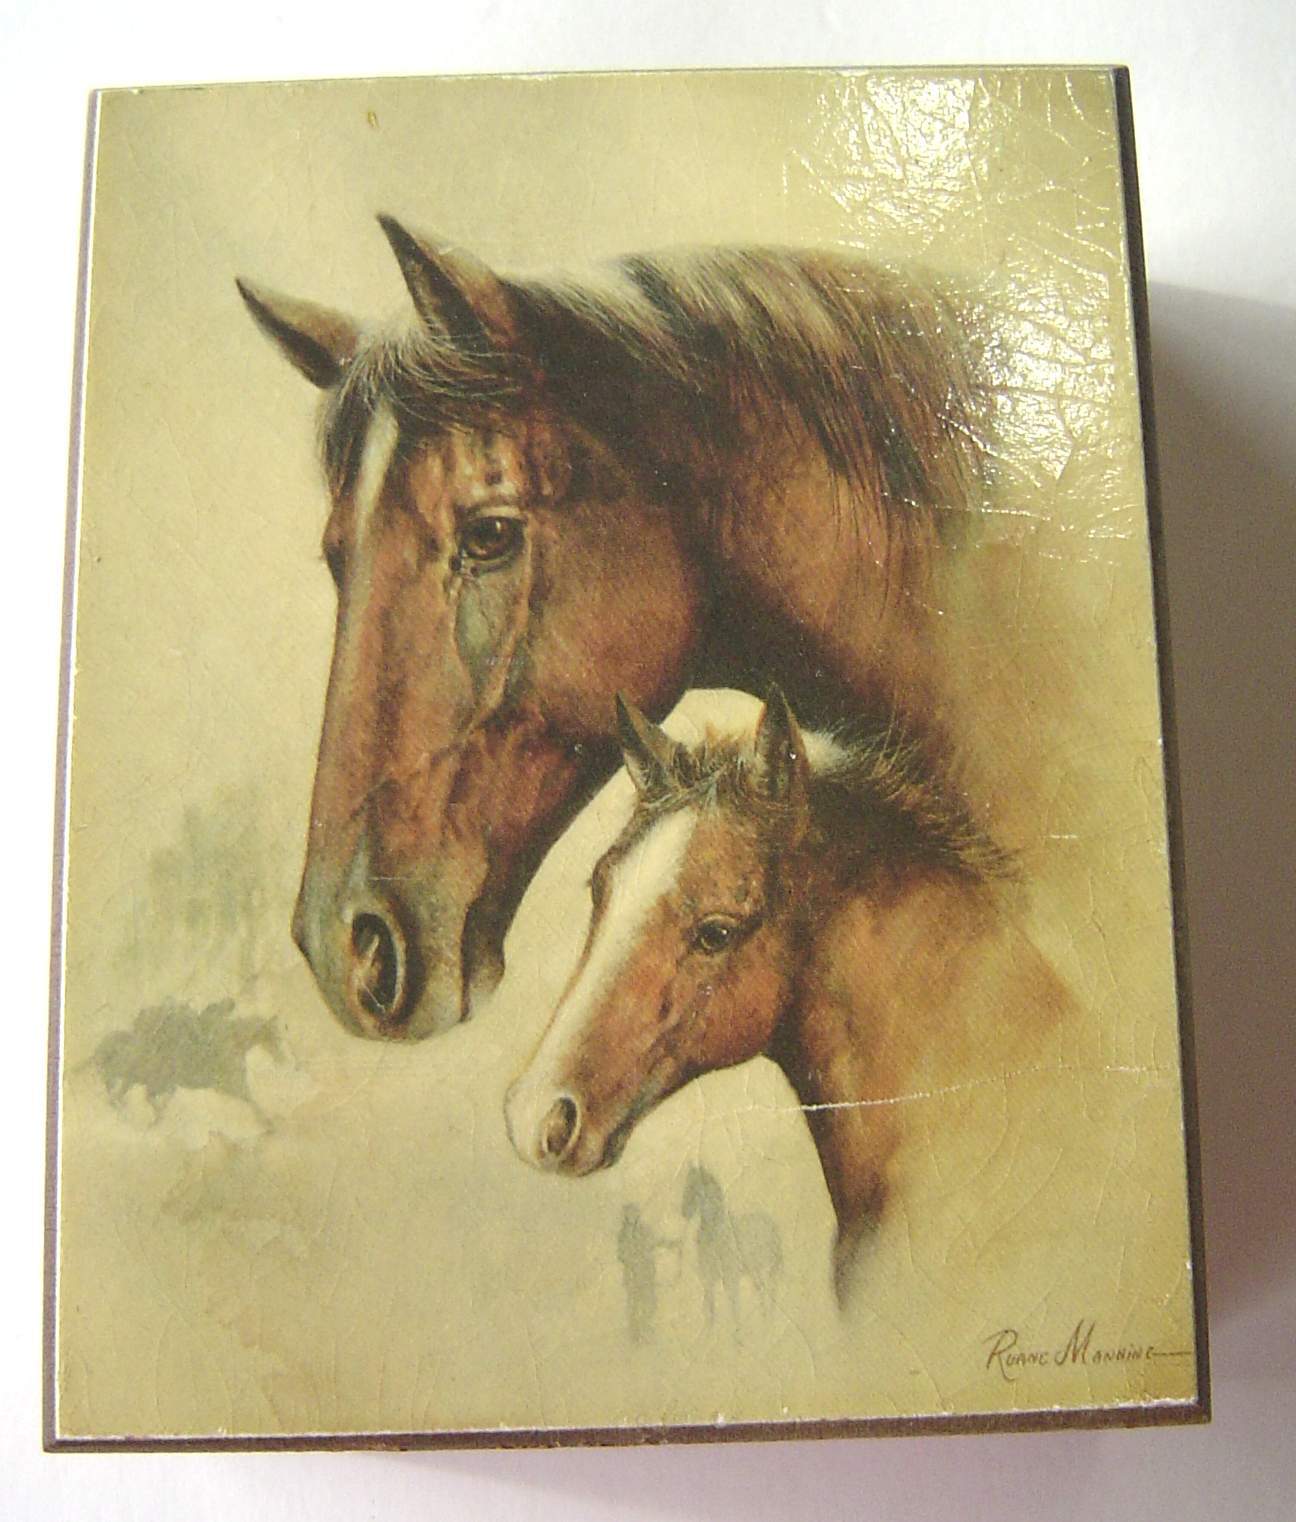  Small Wood Trinket Box Hinged Lid Features Ruane Manning's Horse Mare and Fowl - $19.99